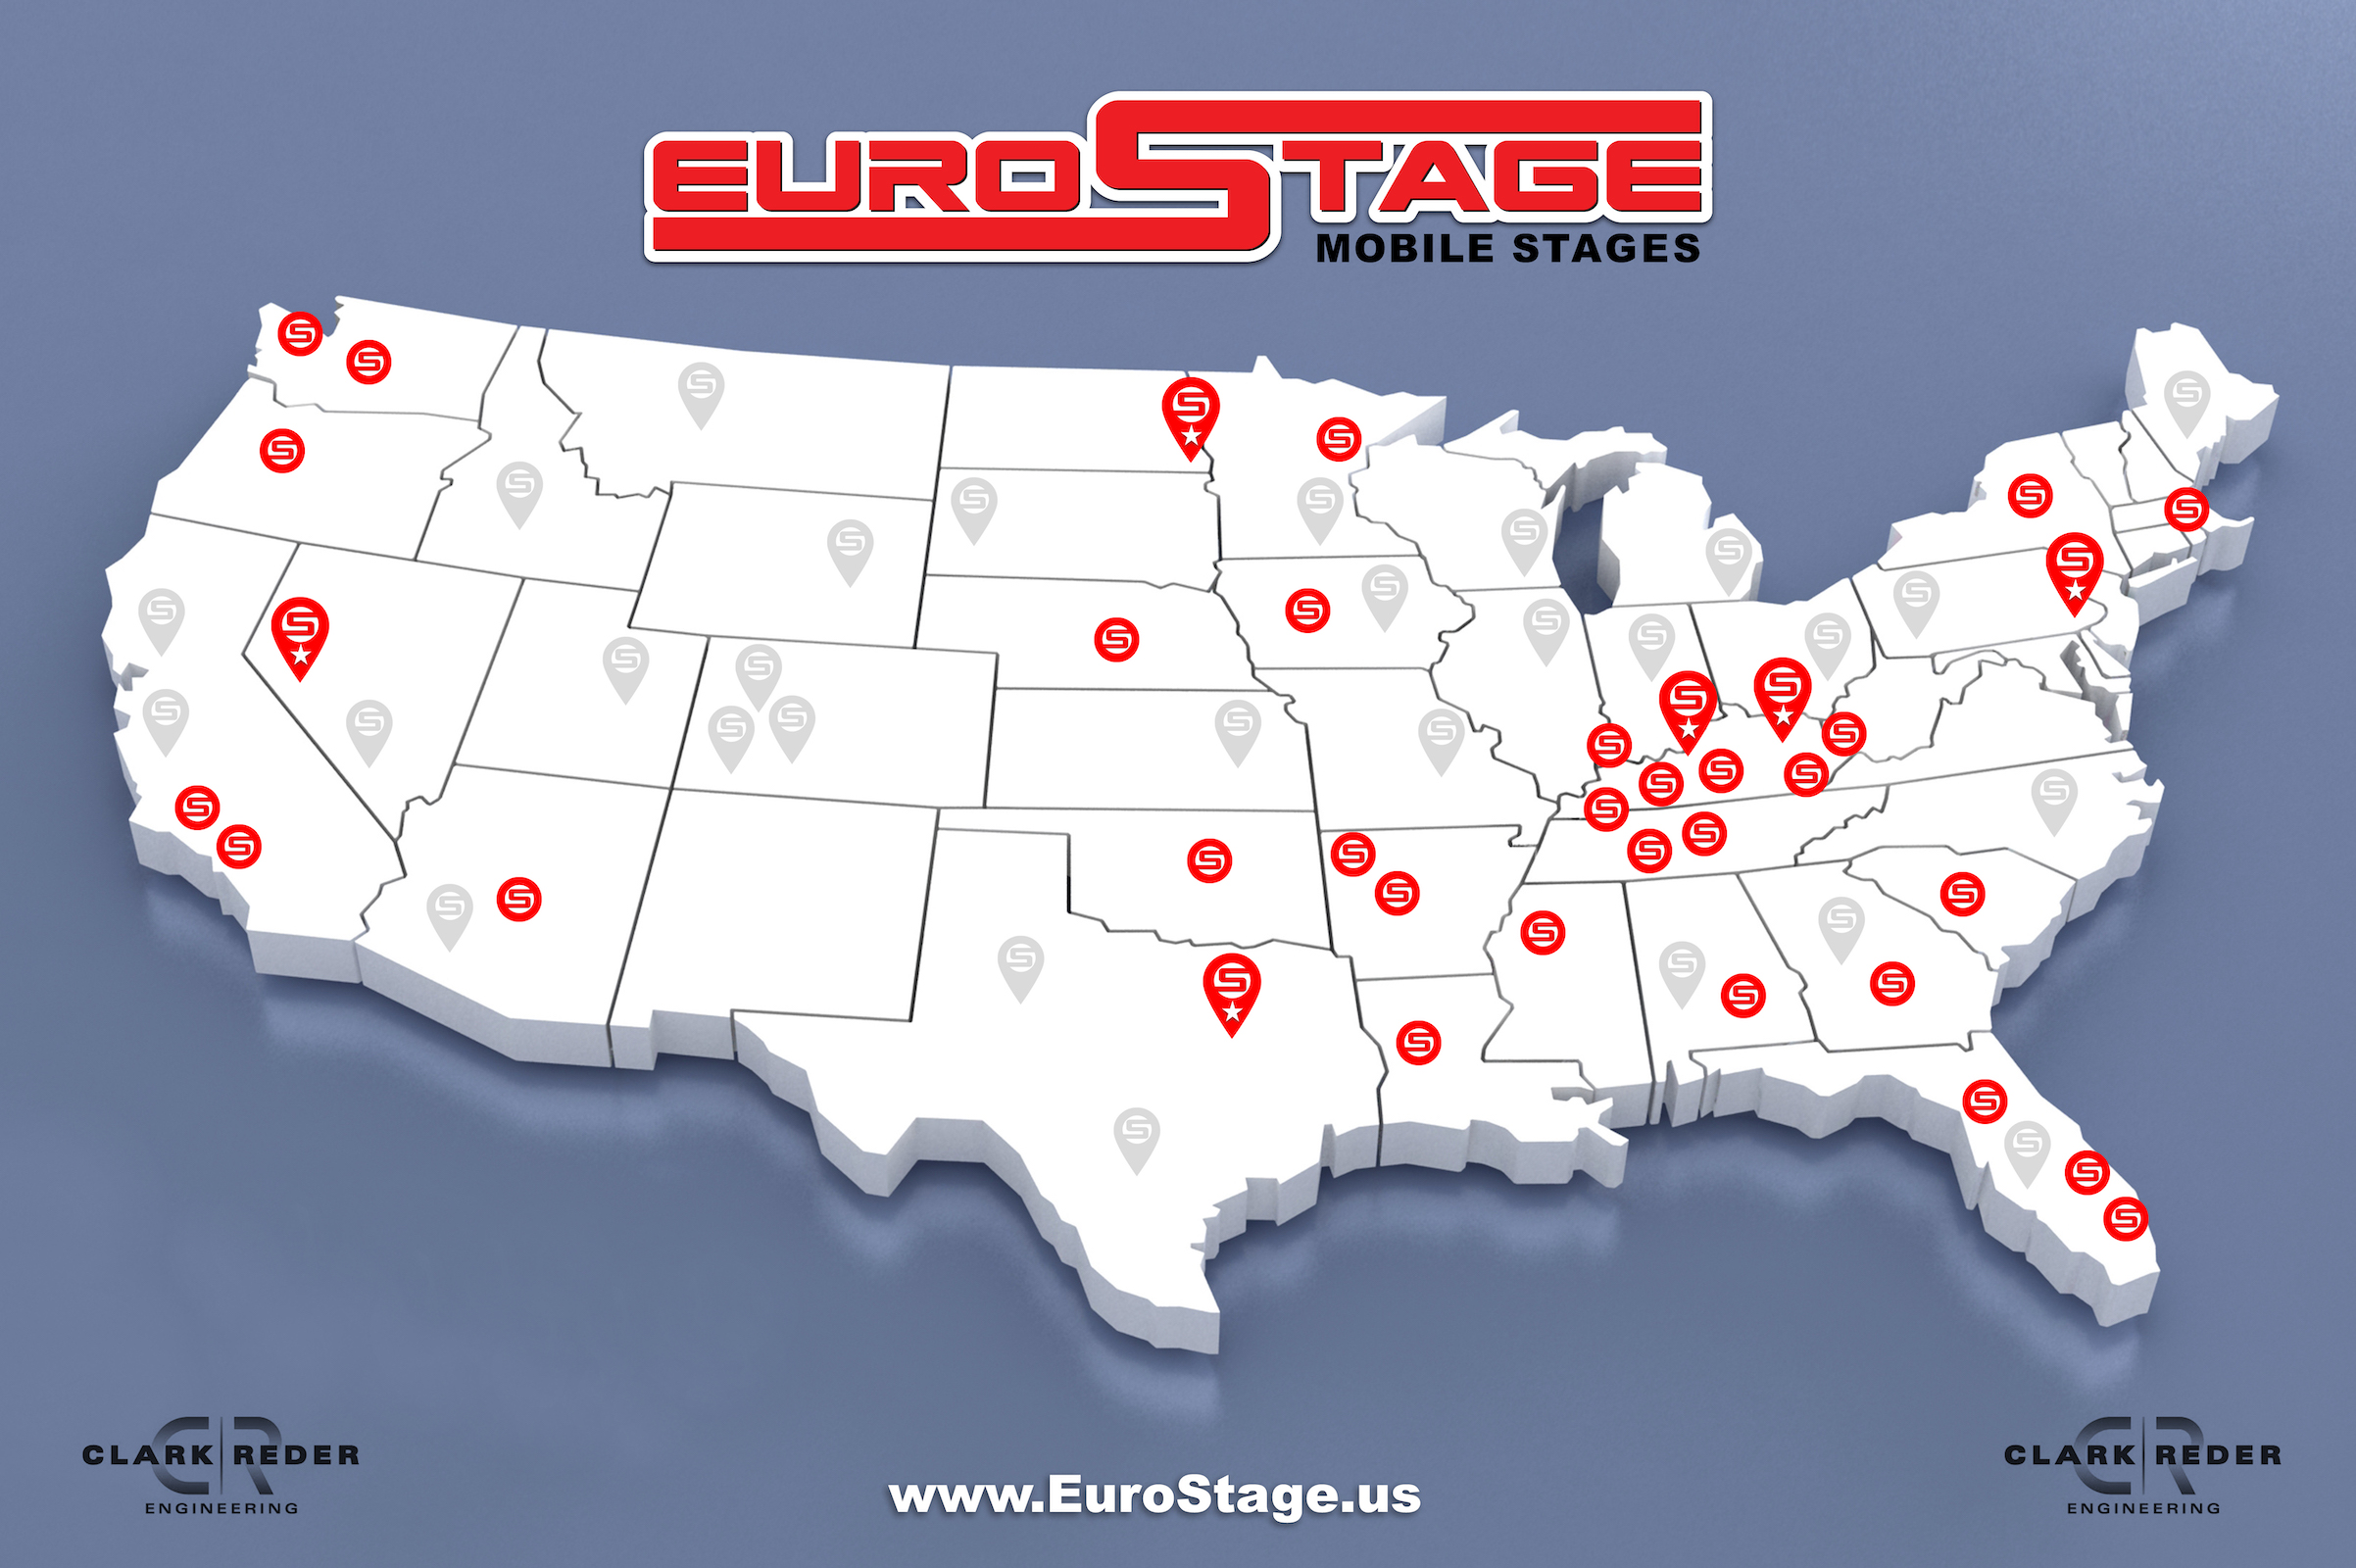 EuroStage Mobile Stages